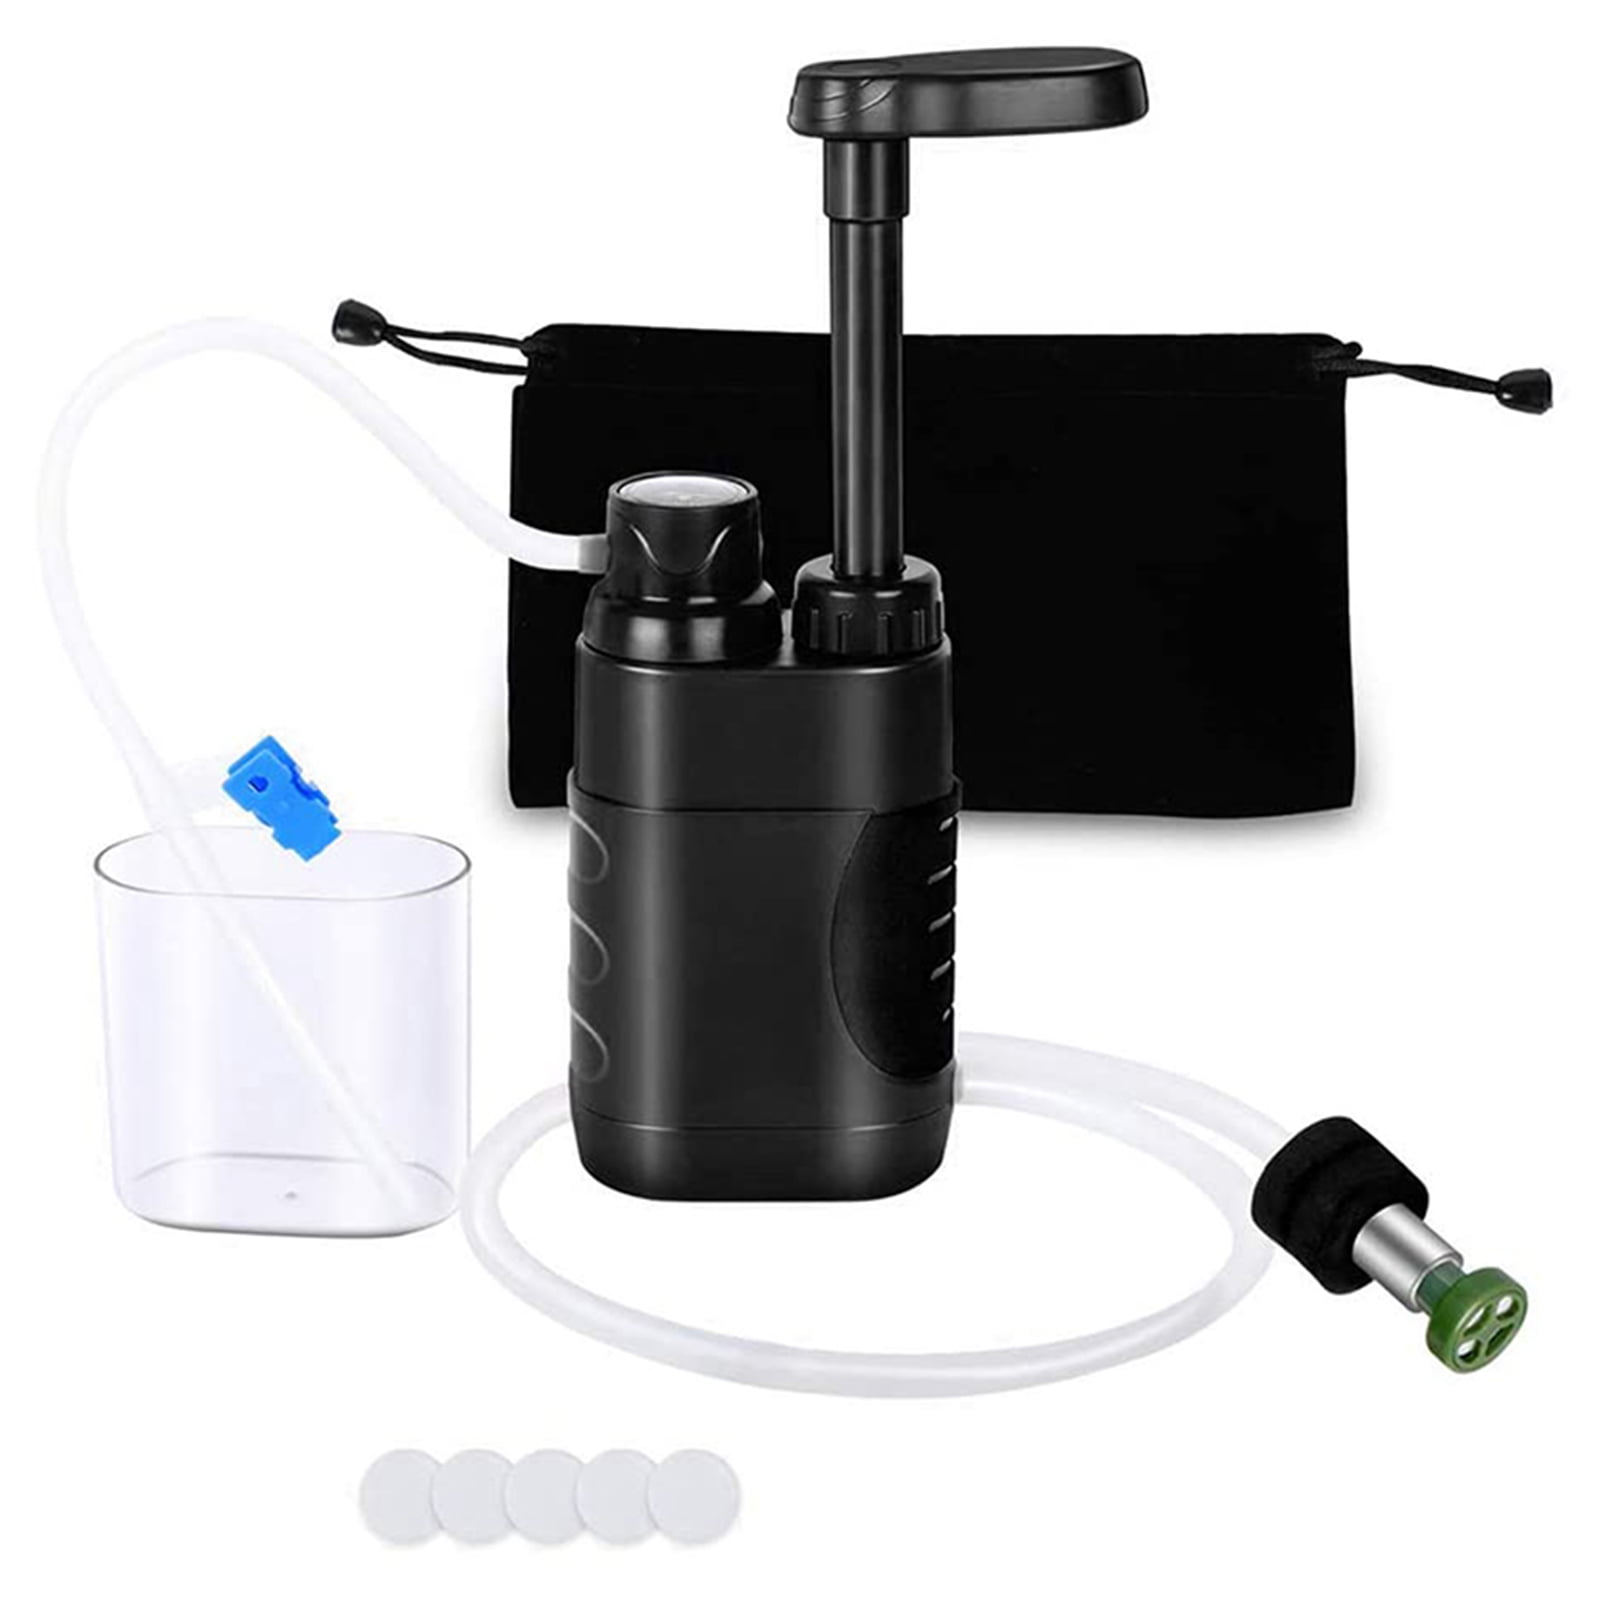 Portable Water Purifier Water Filter Camping Hiking Personal Survival White 